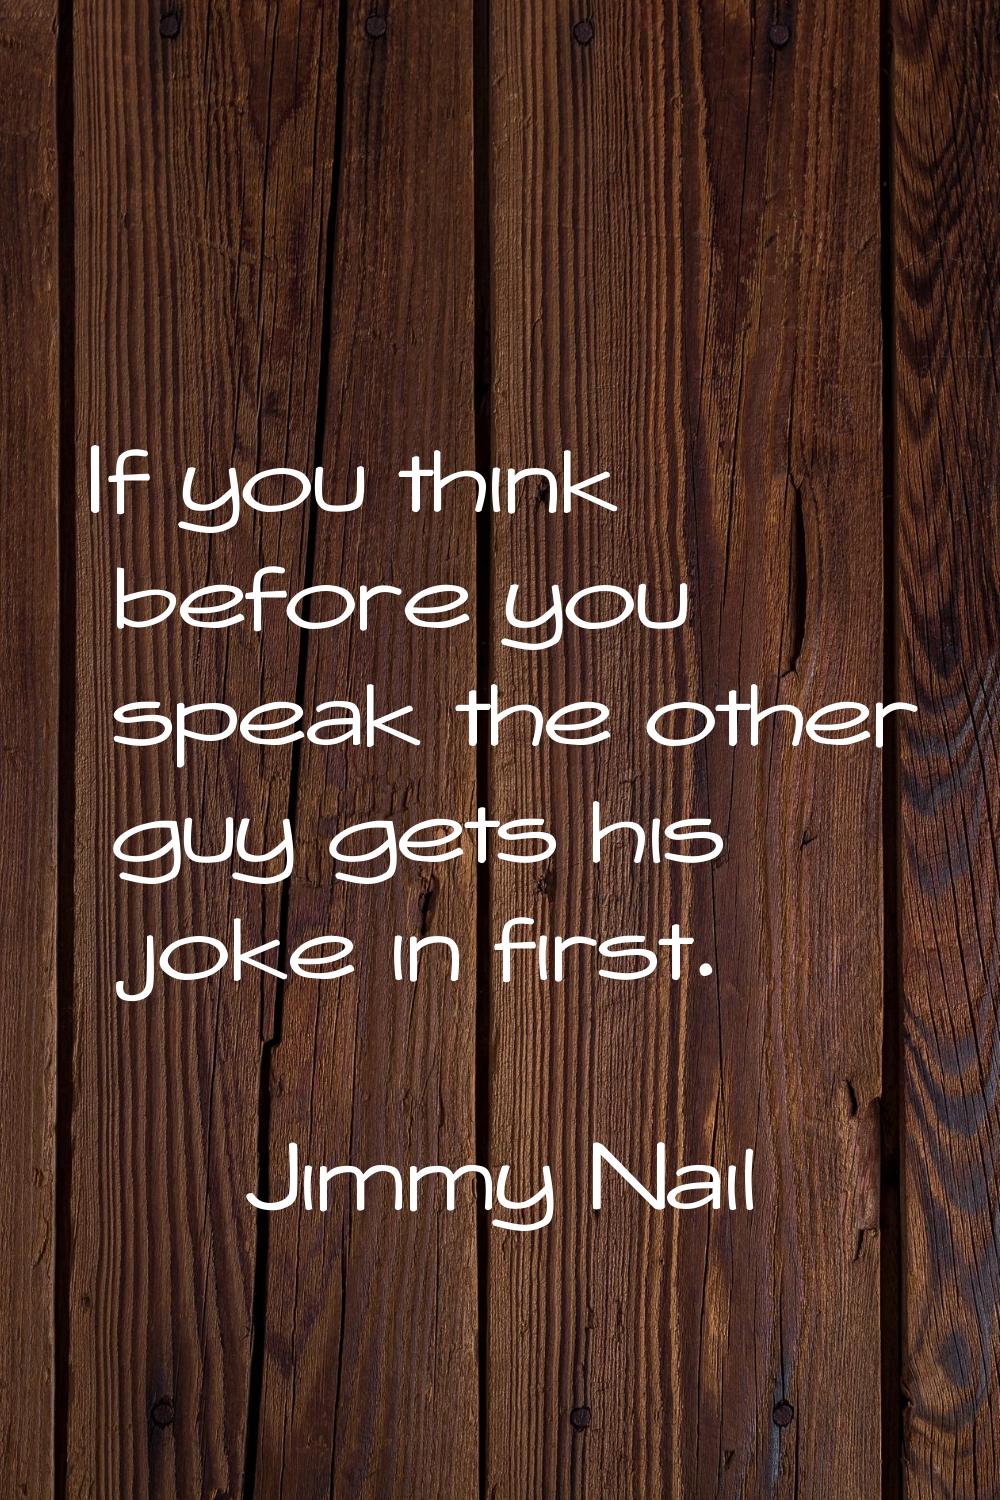 If you think before you speak the other guy gets his joke in first.